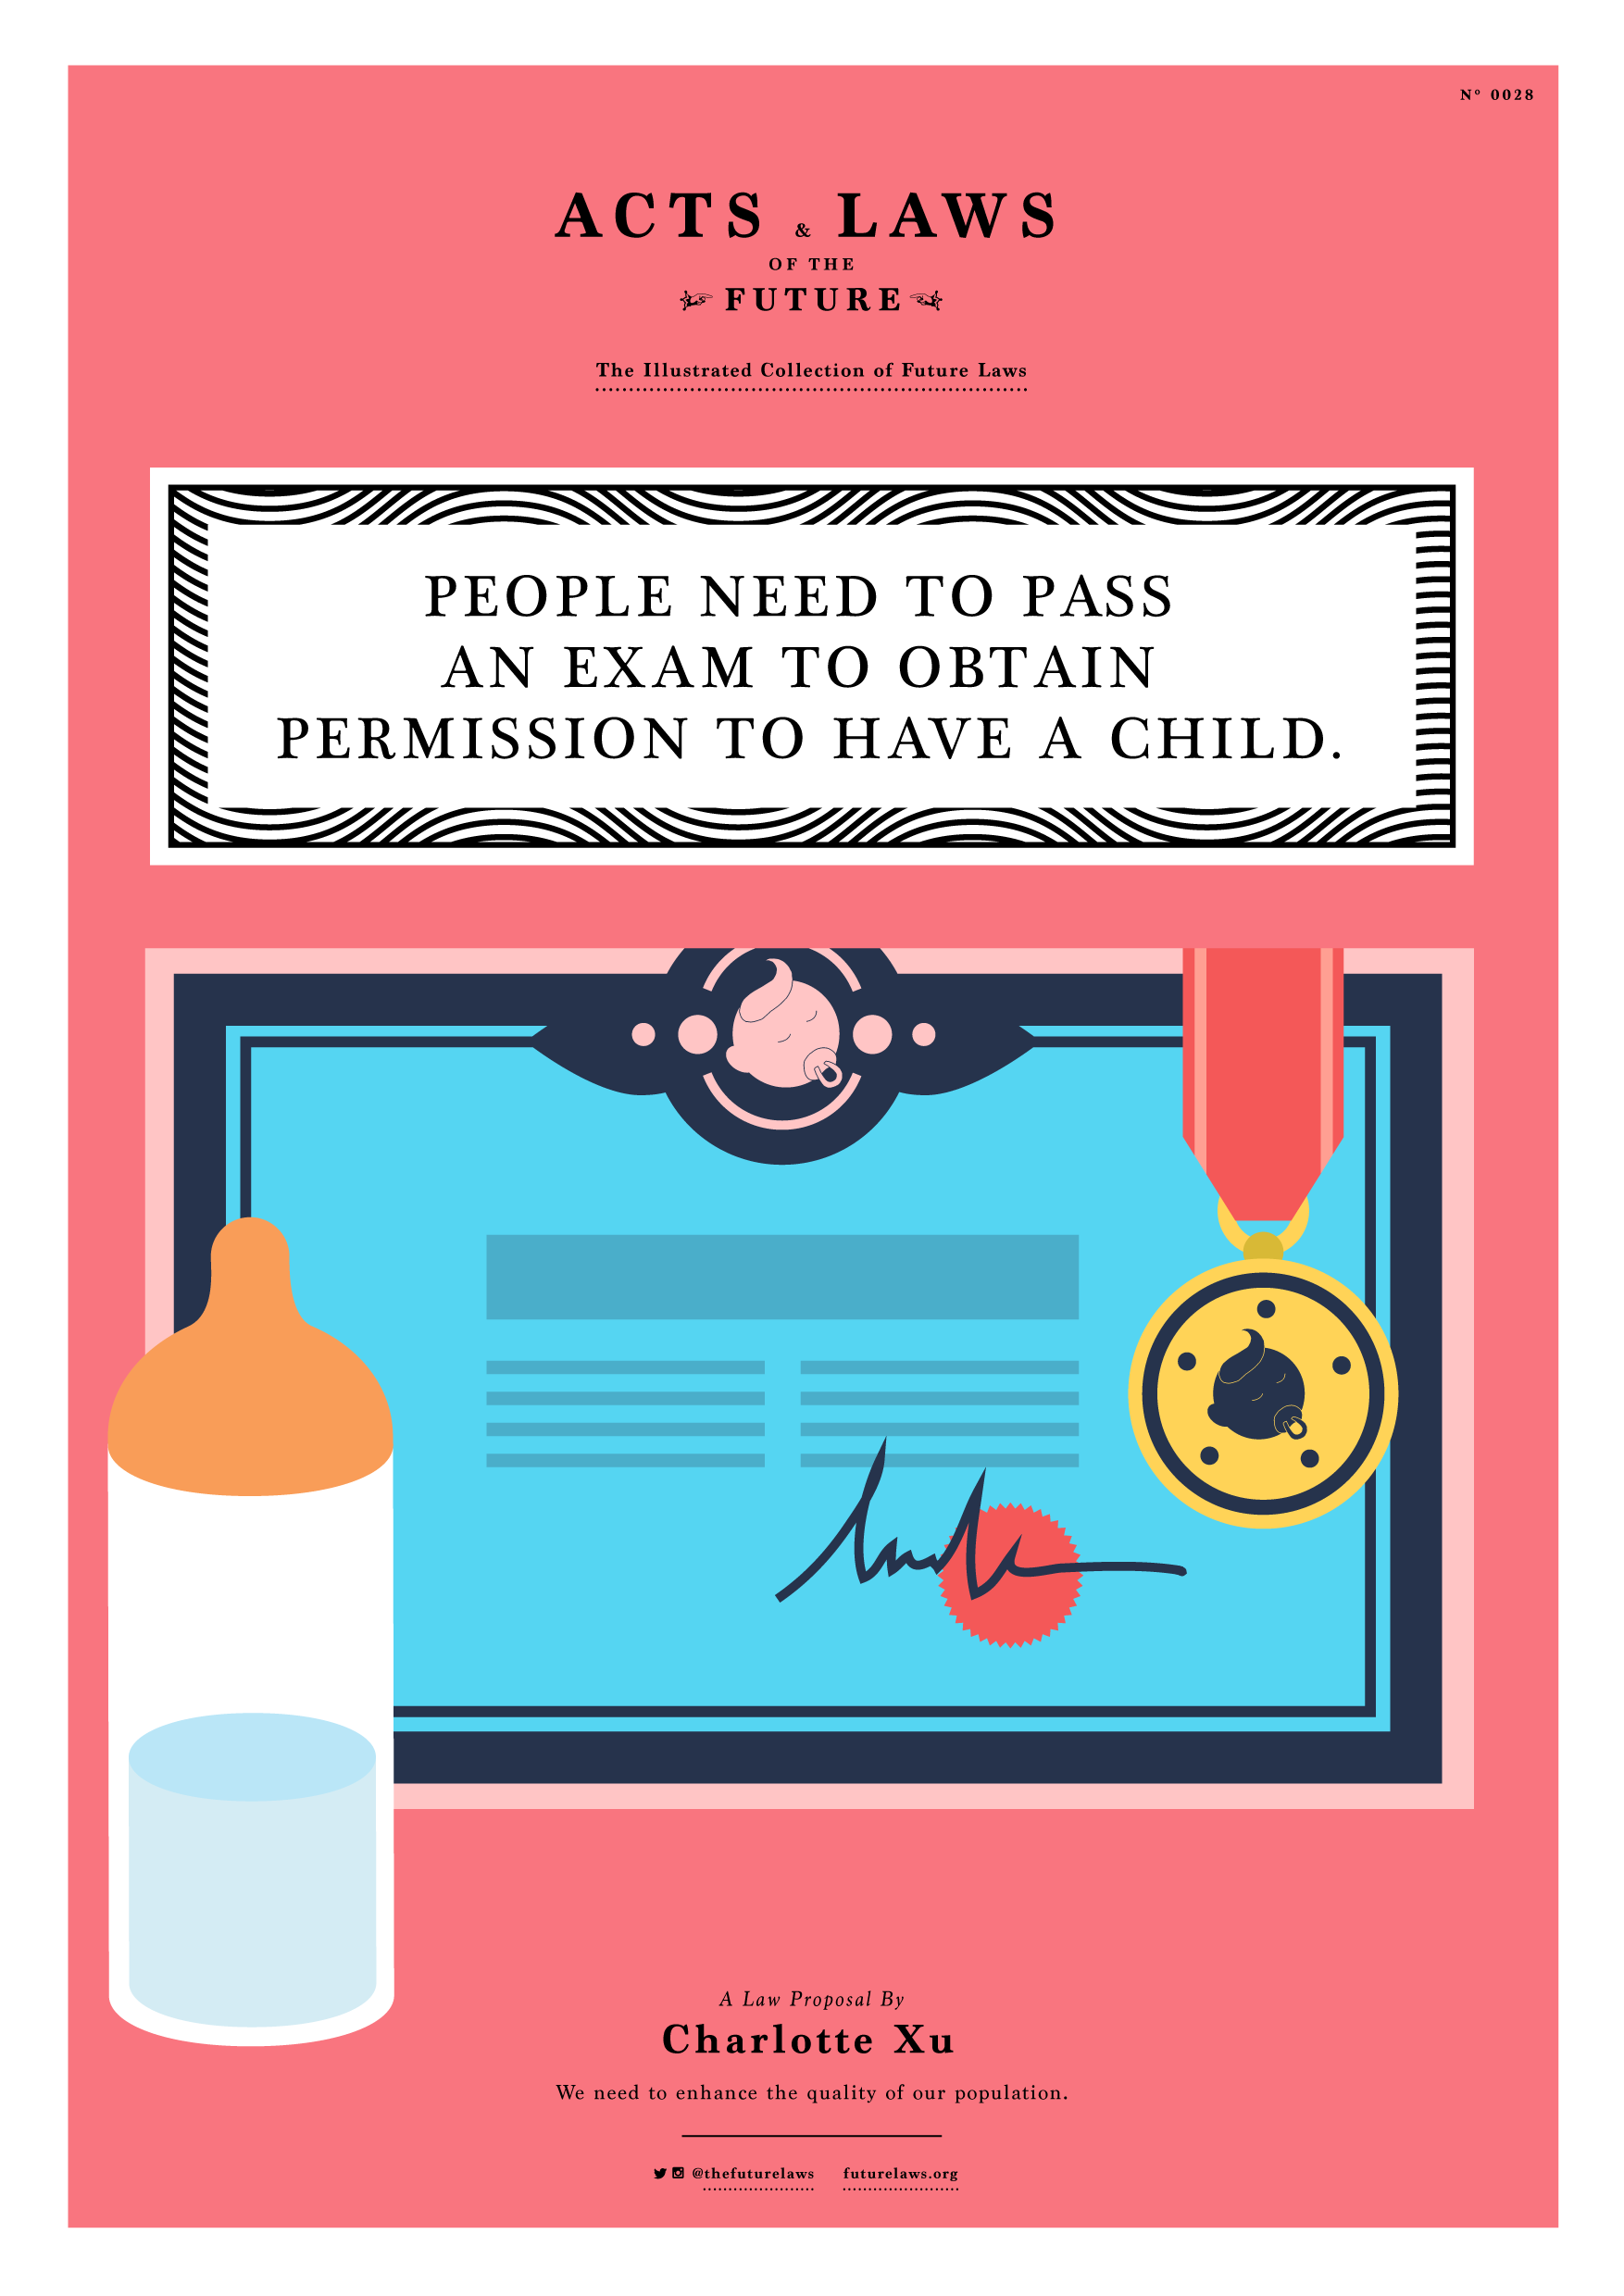 People need to pass an exam to obtain permission to have a child.